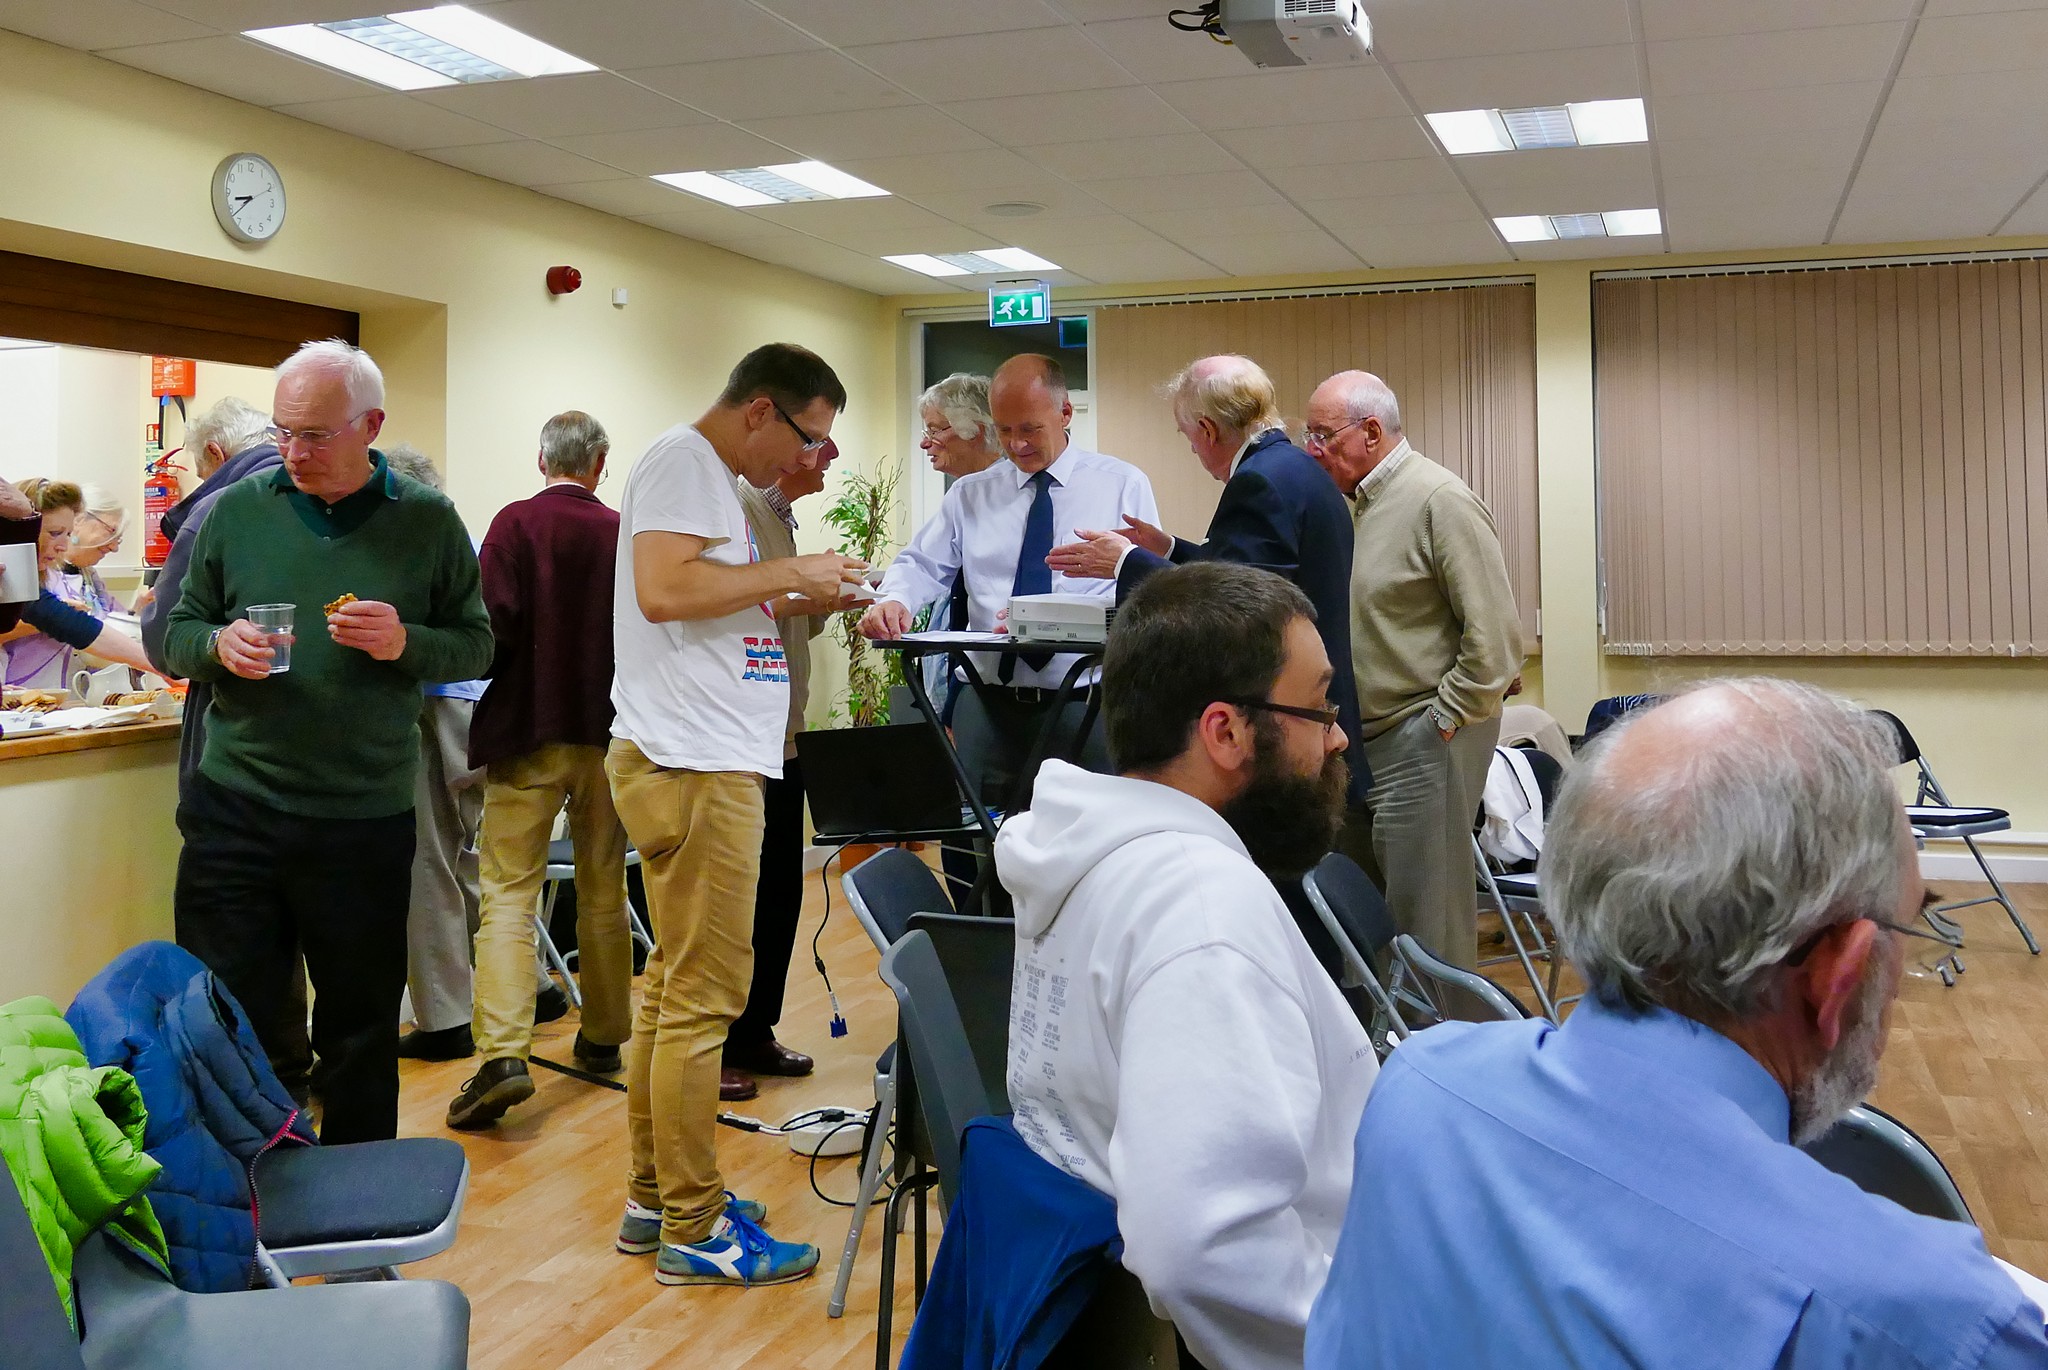 Chesterfield-Civic-Society-AGM-2018-02